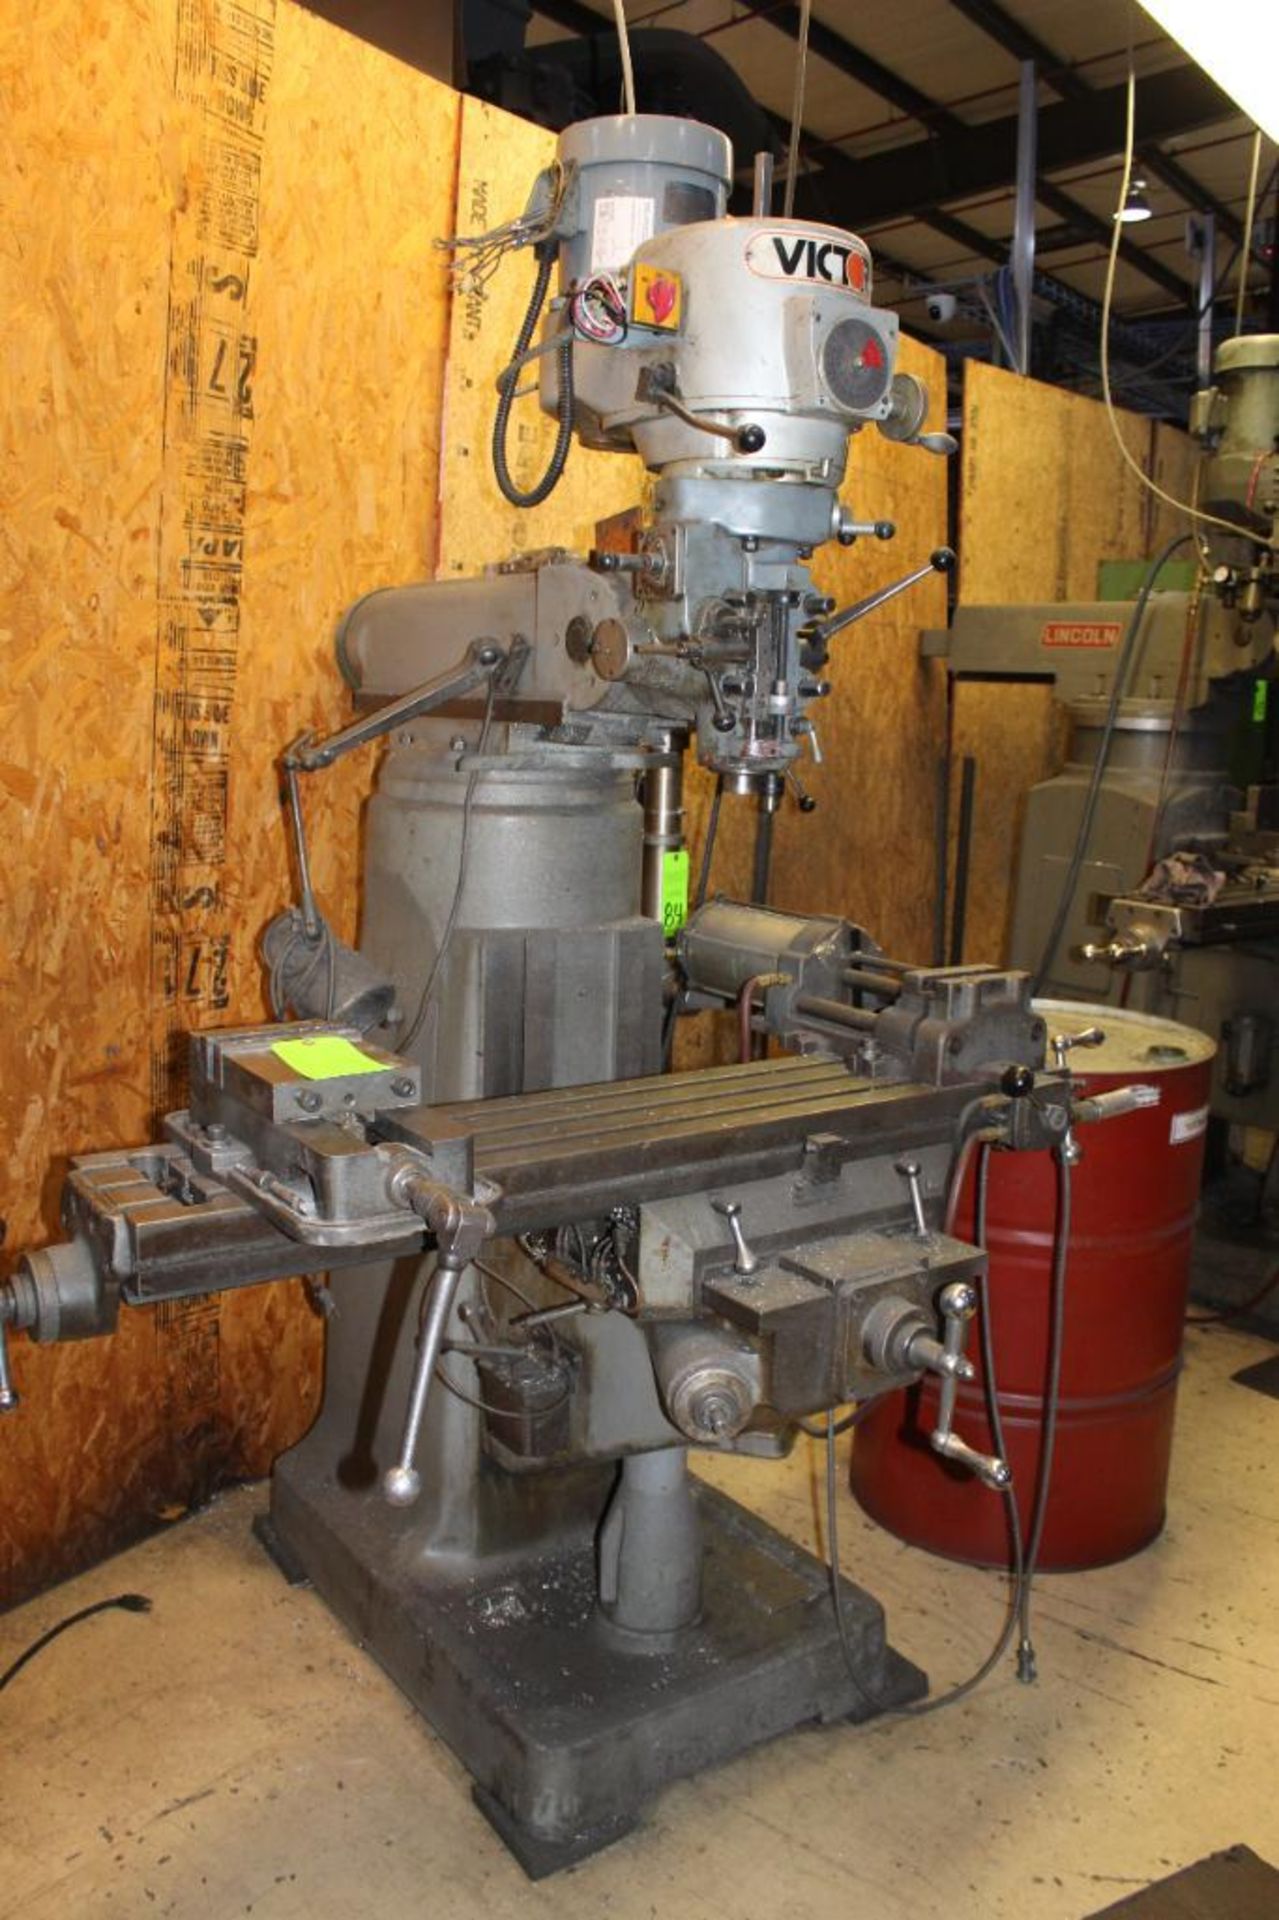 Victor Knee Mill Model CD2VS W/ AcuRite Millmate and 12" Rotary Table Bridgeport News